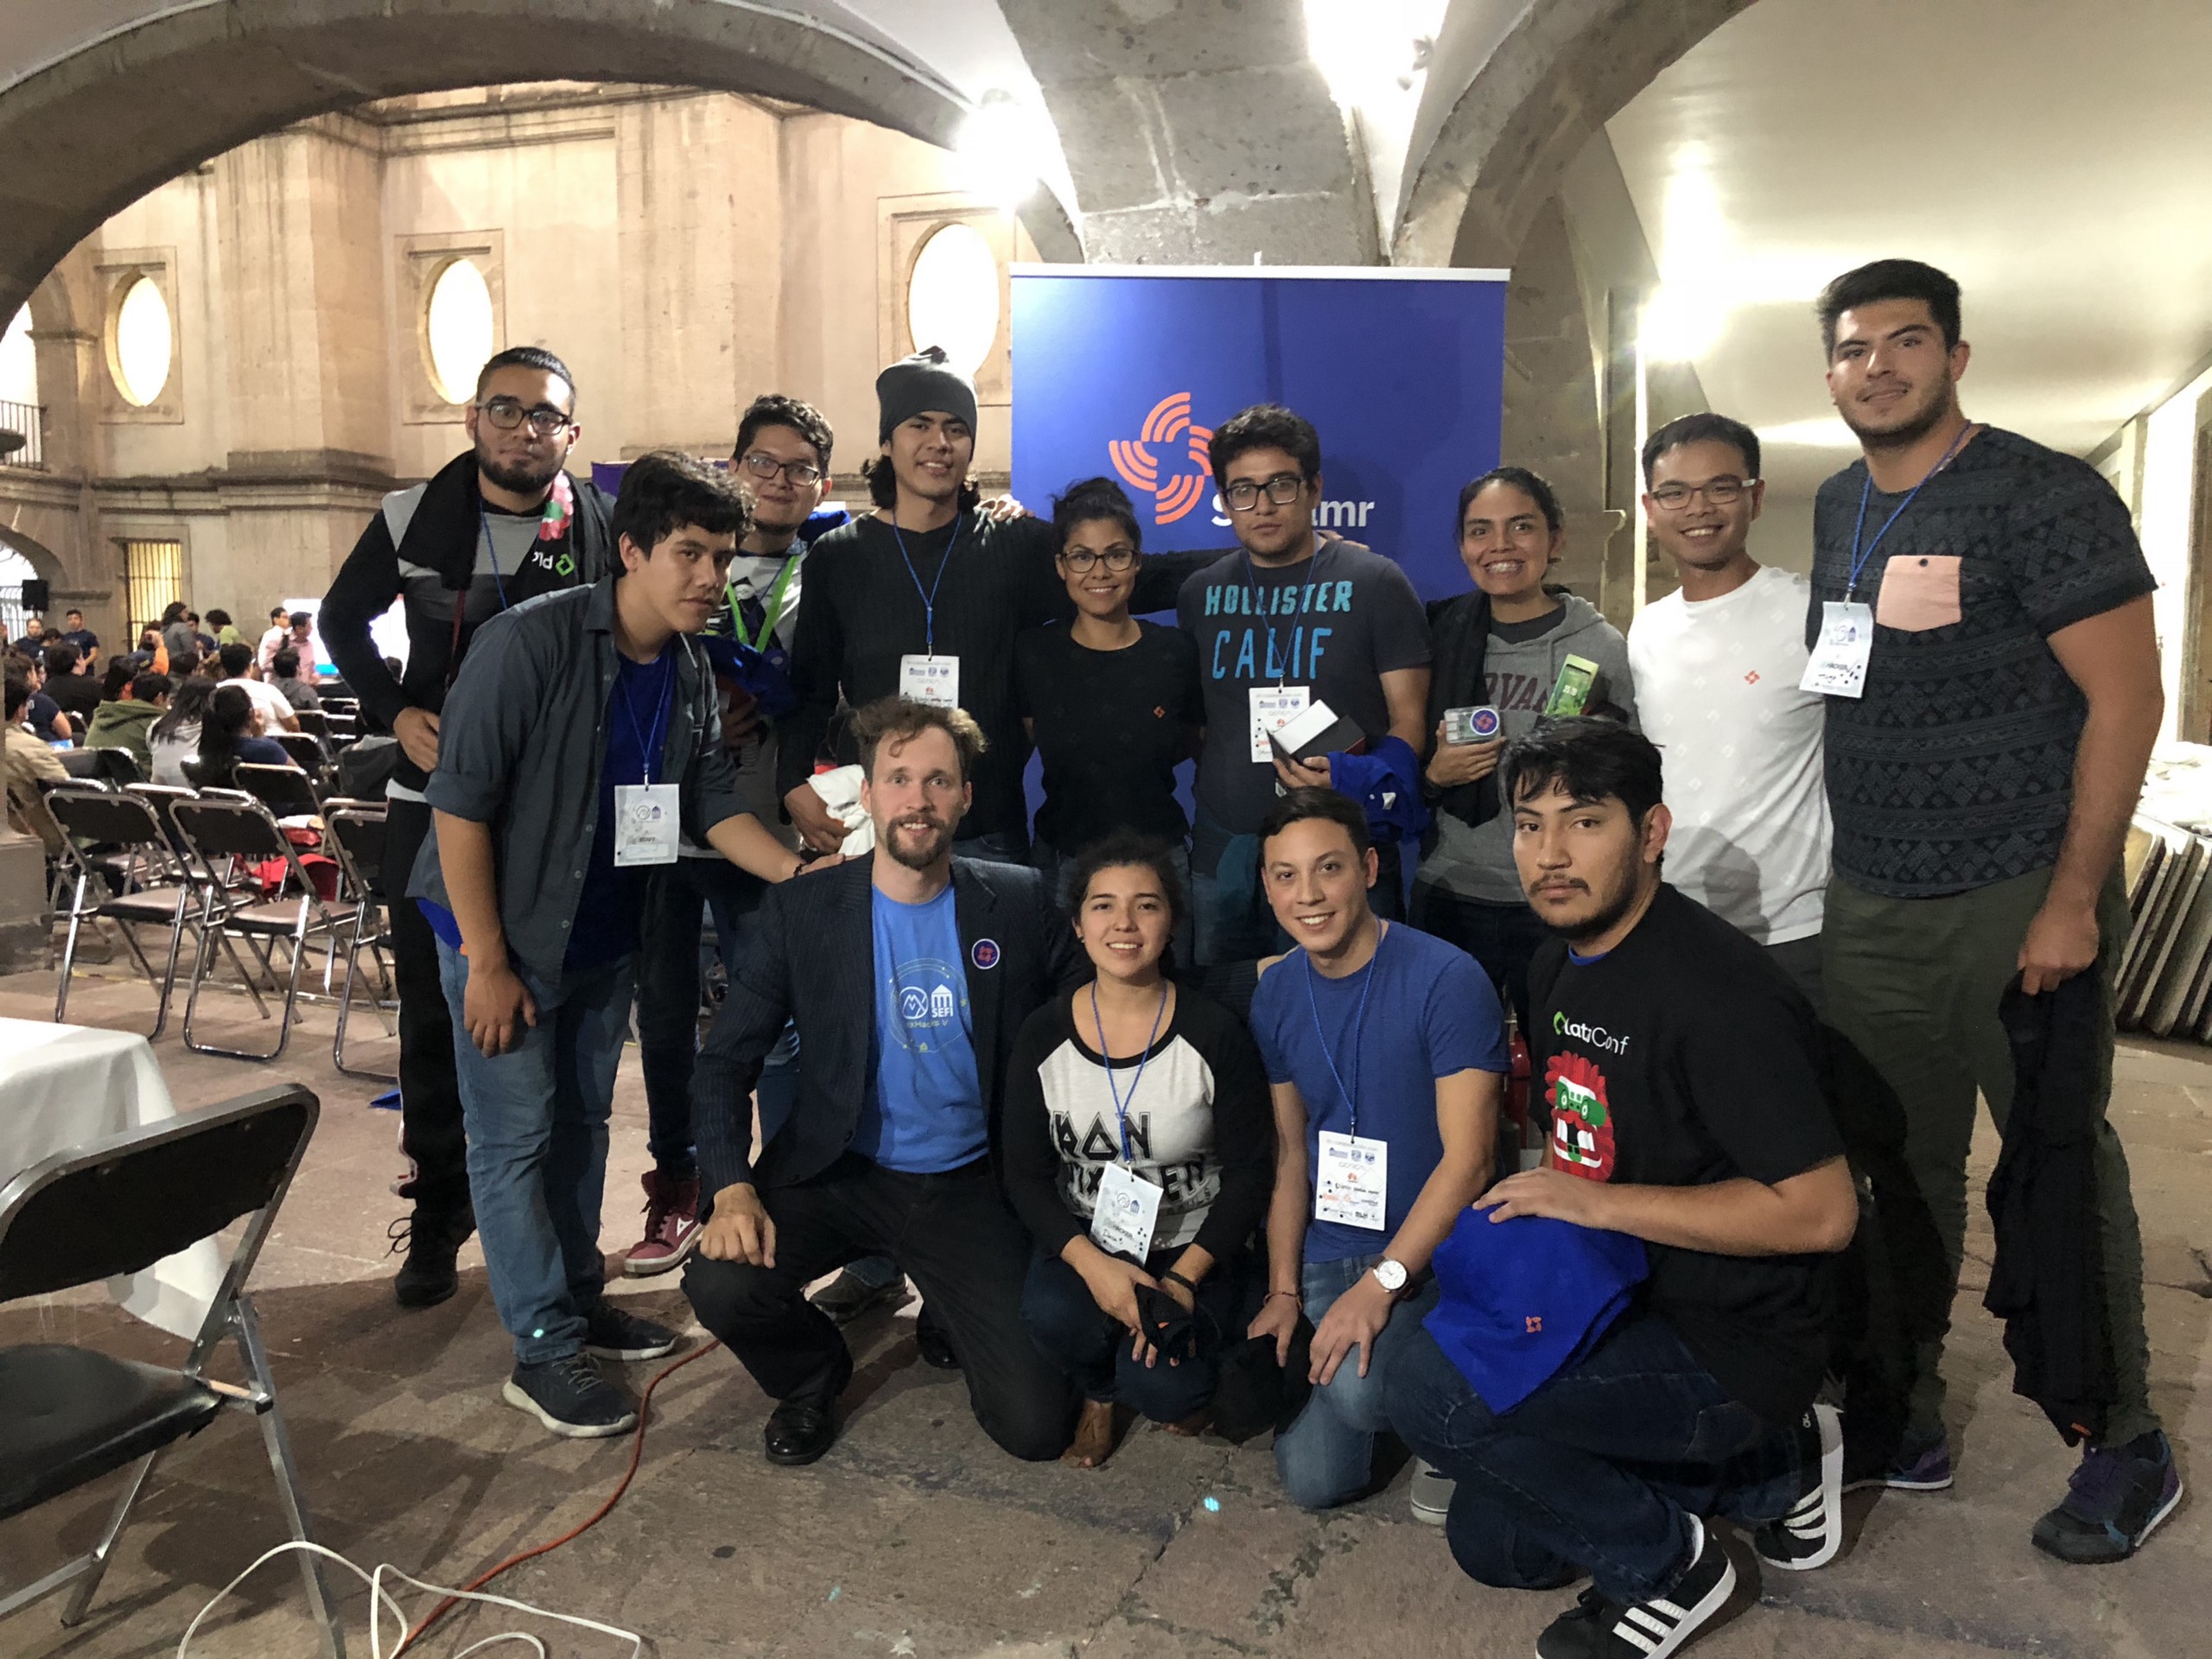 Streamr’s hardcore Hackathon in Mexico: use cases to fend off bus robbers and feed meat eating…